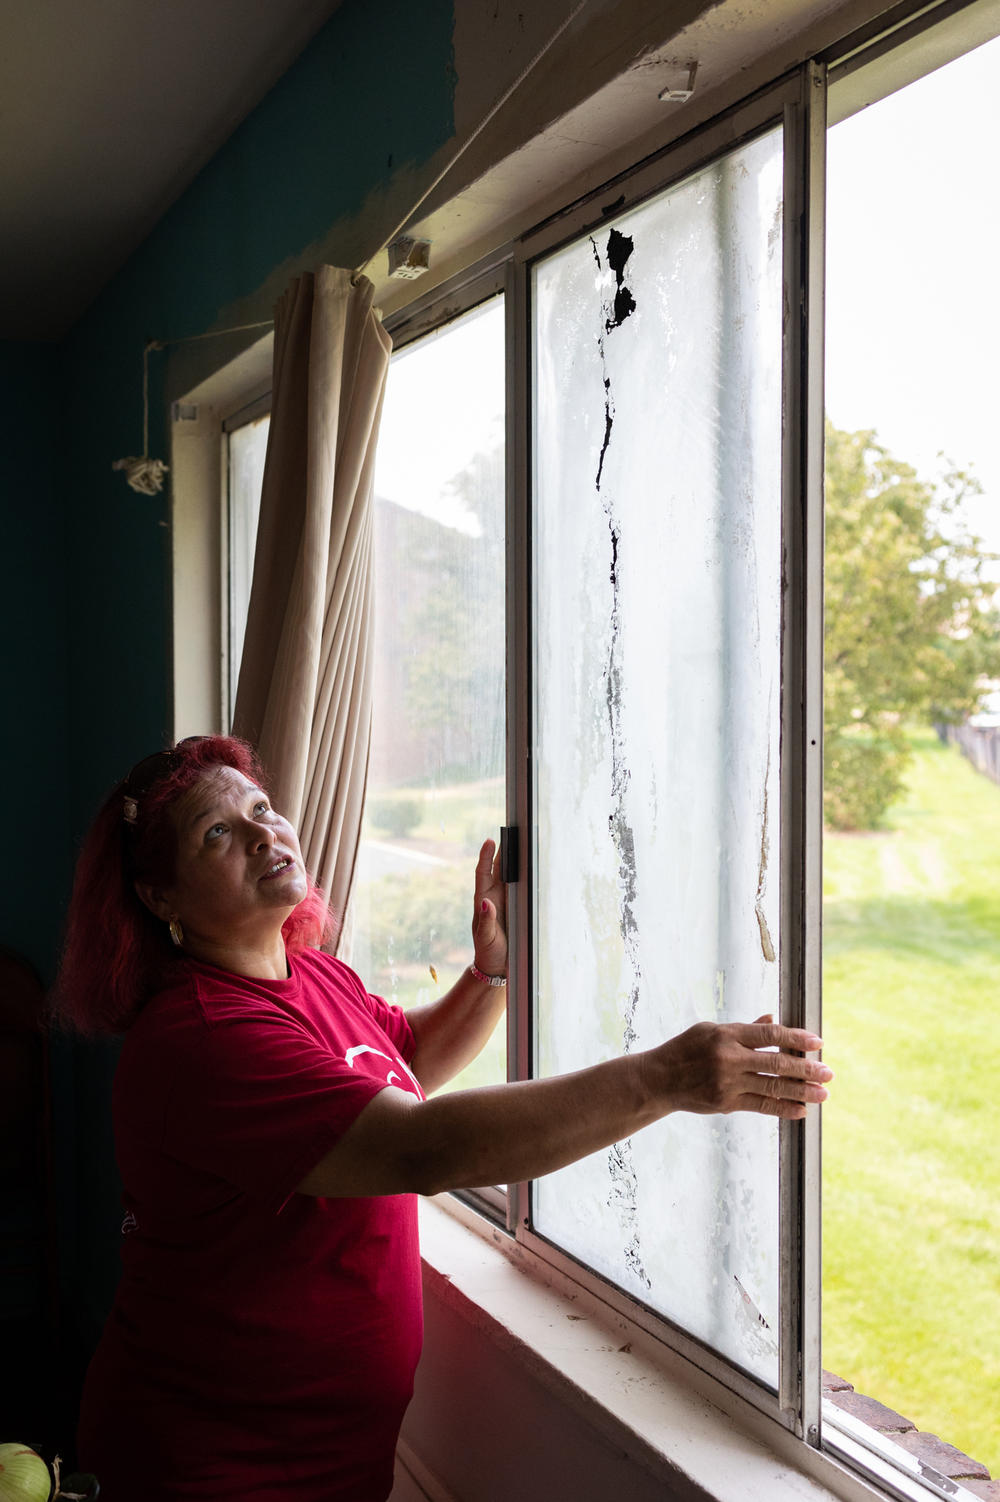 María Lara shows a loose and broken window in her home. She says she is afraid it will fall and hurt her daughter.